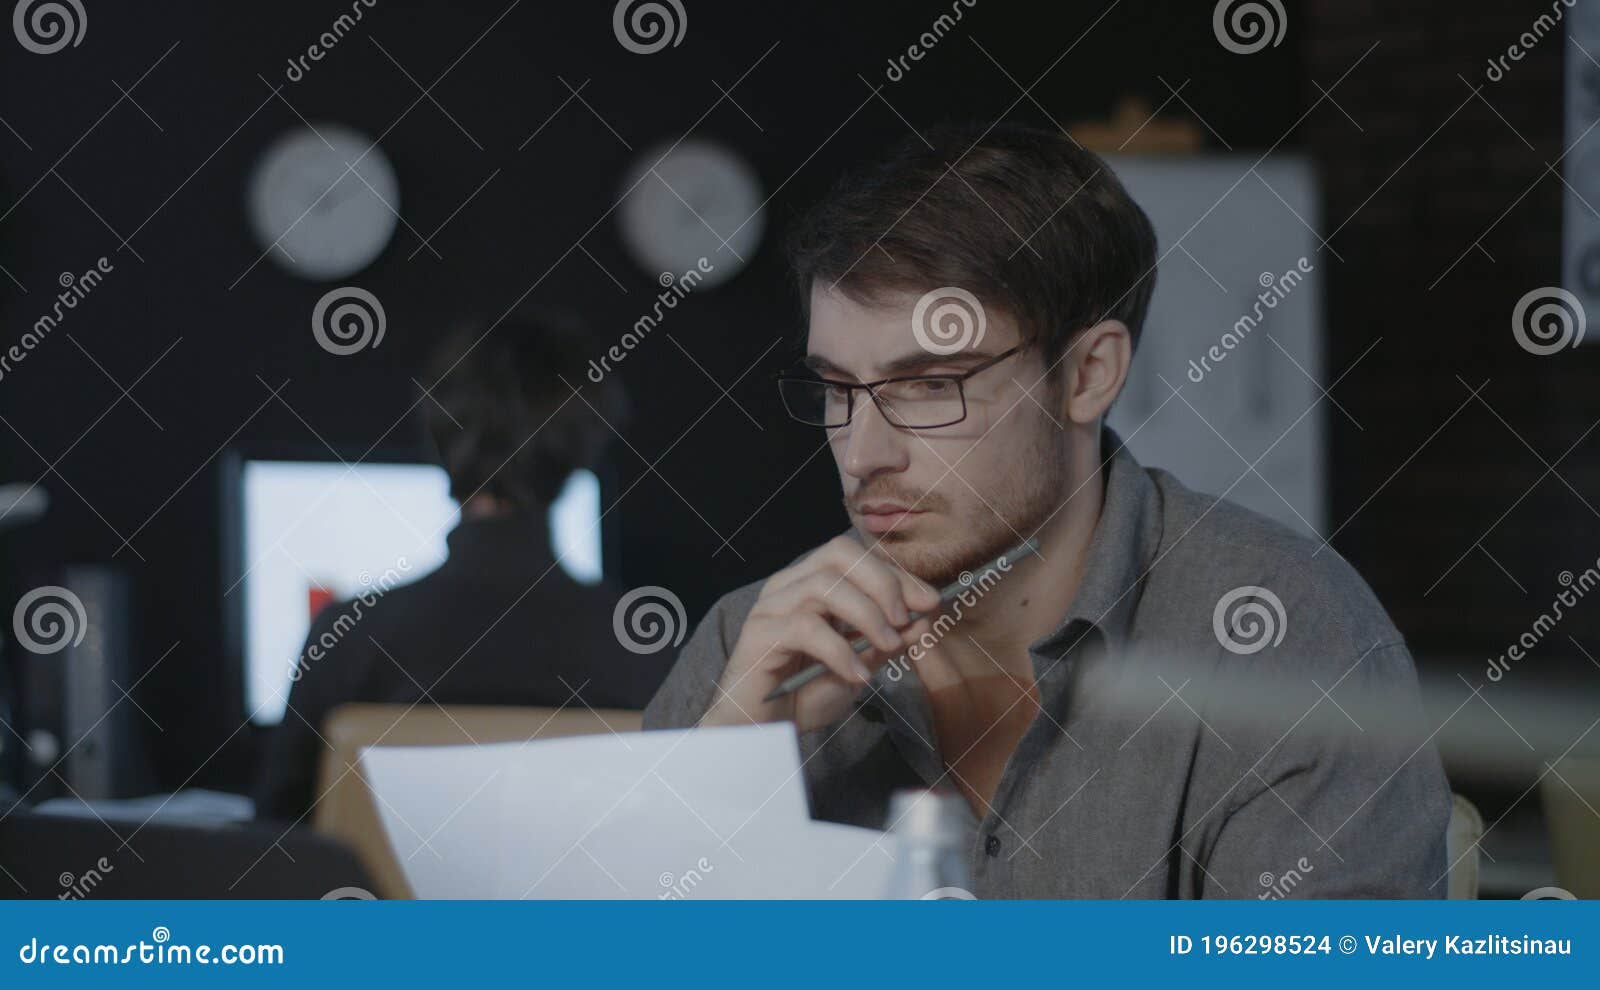 concentrated business analyst watching document and laptop screen in dark office